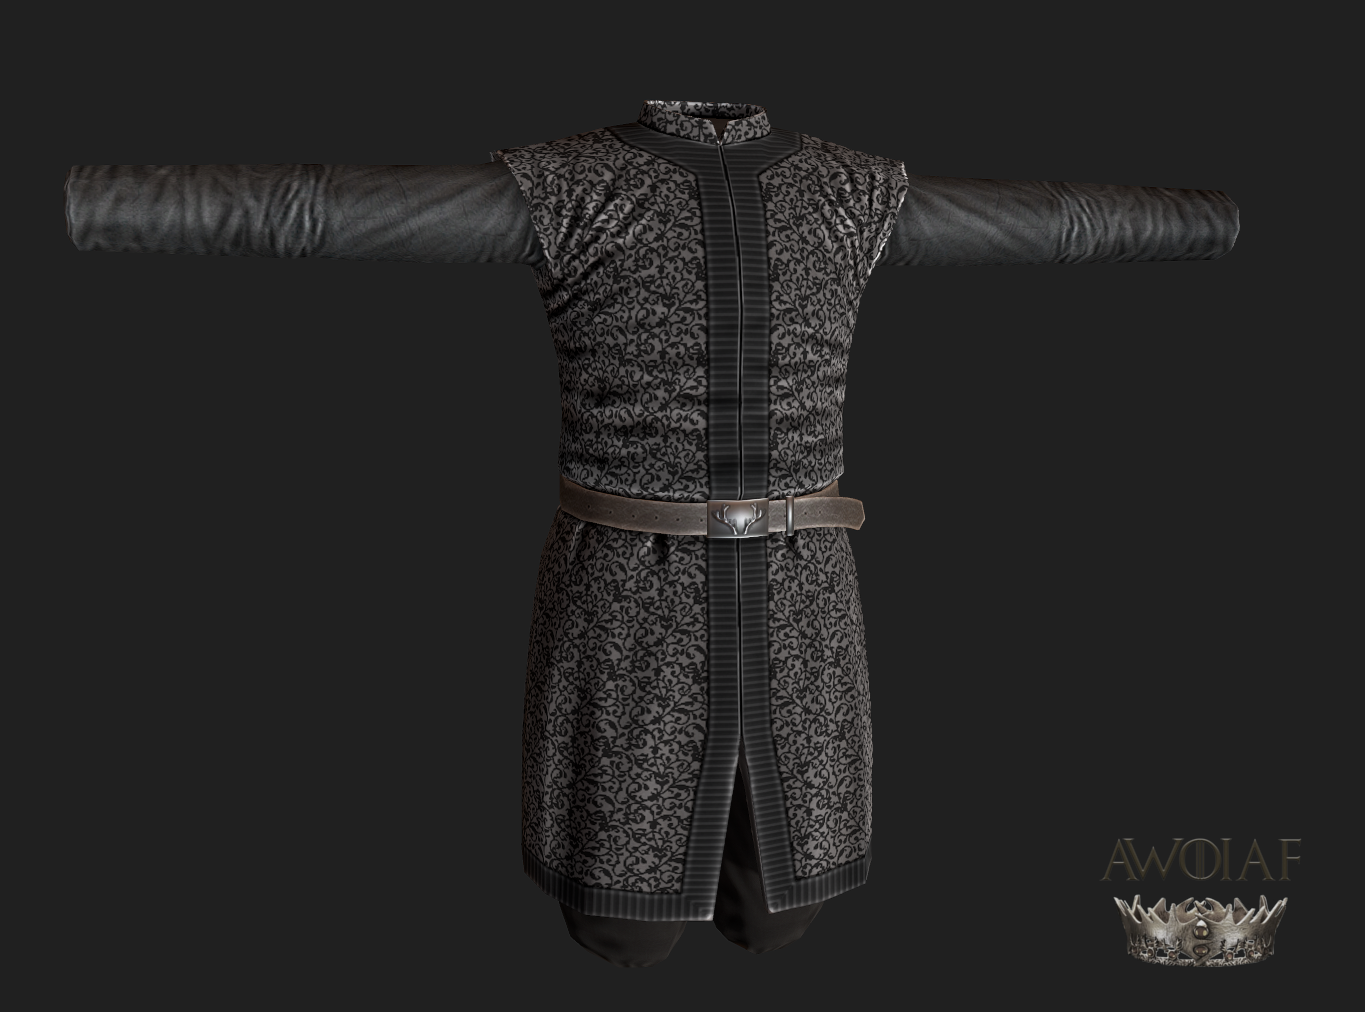 mount and blade warband game of thrones mod